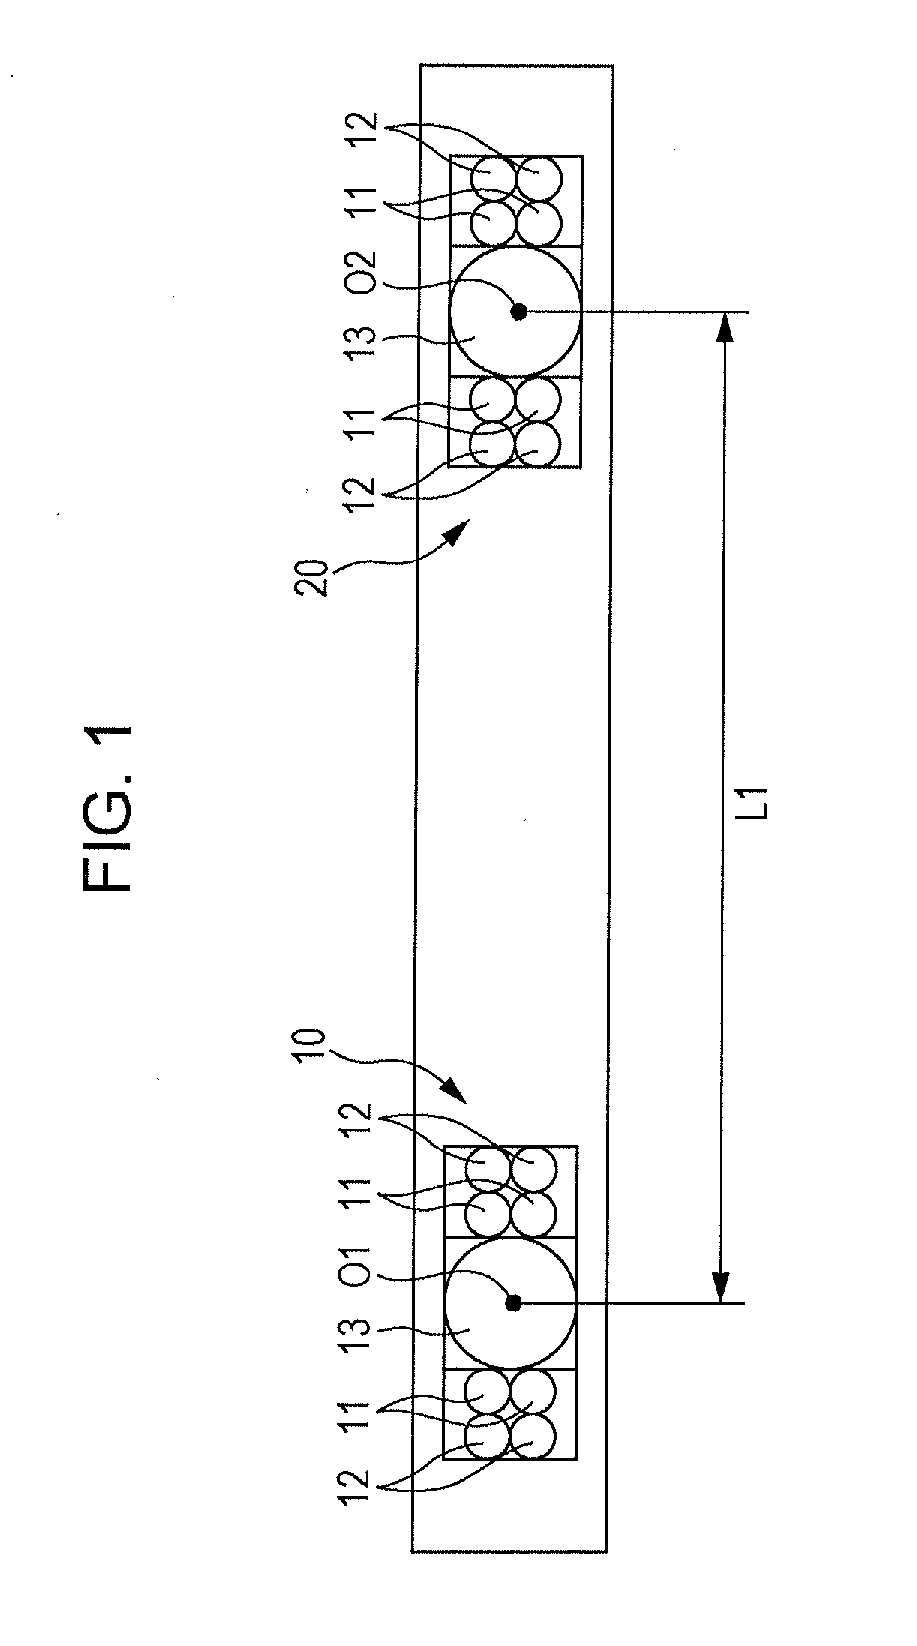 In-vehicle imaging device